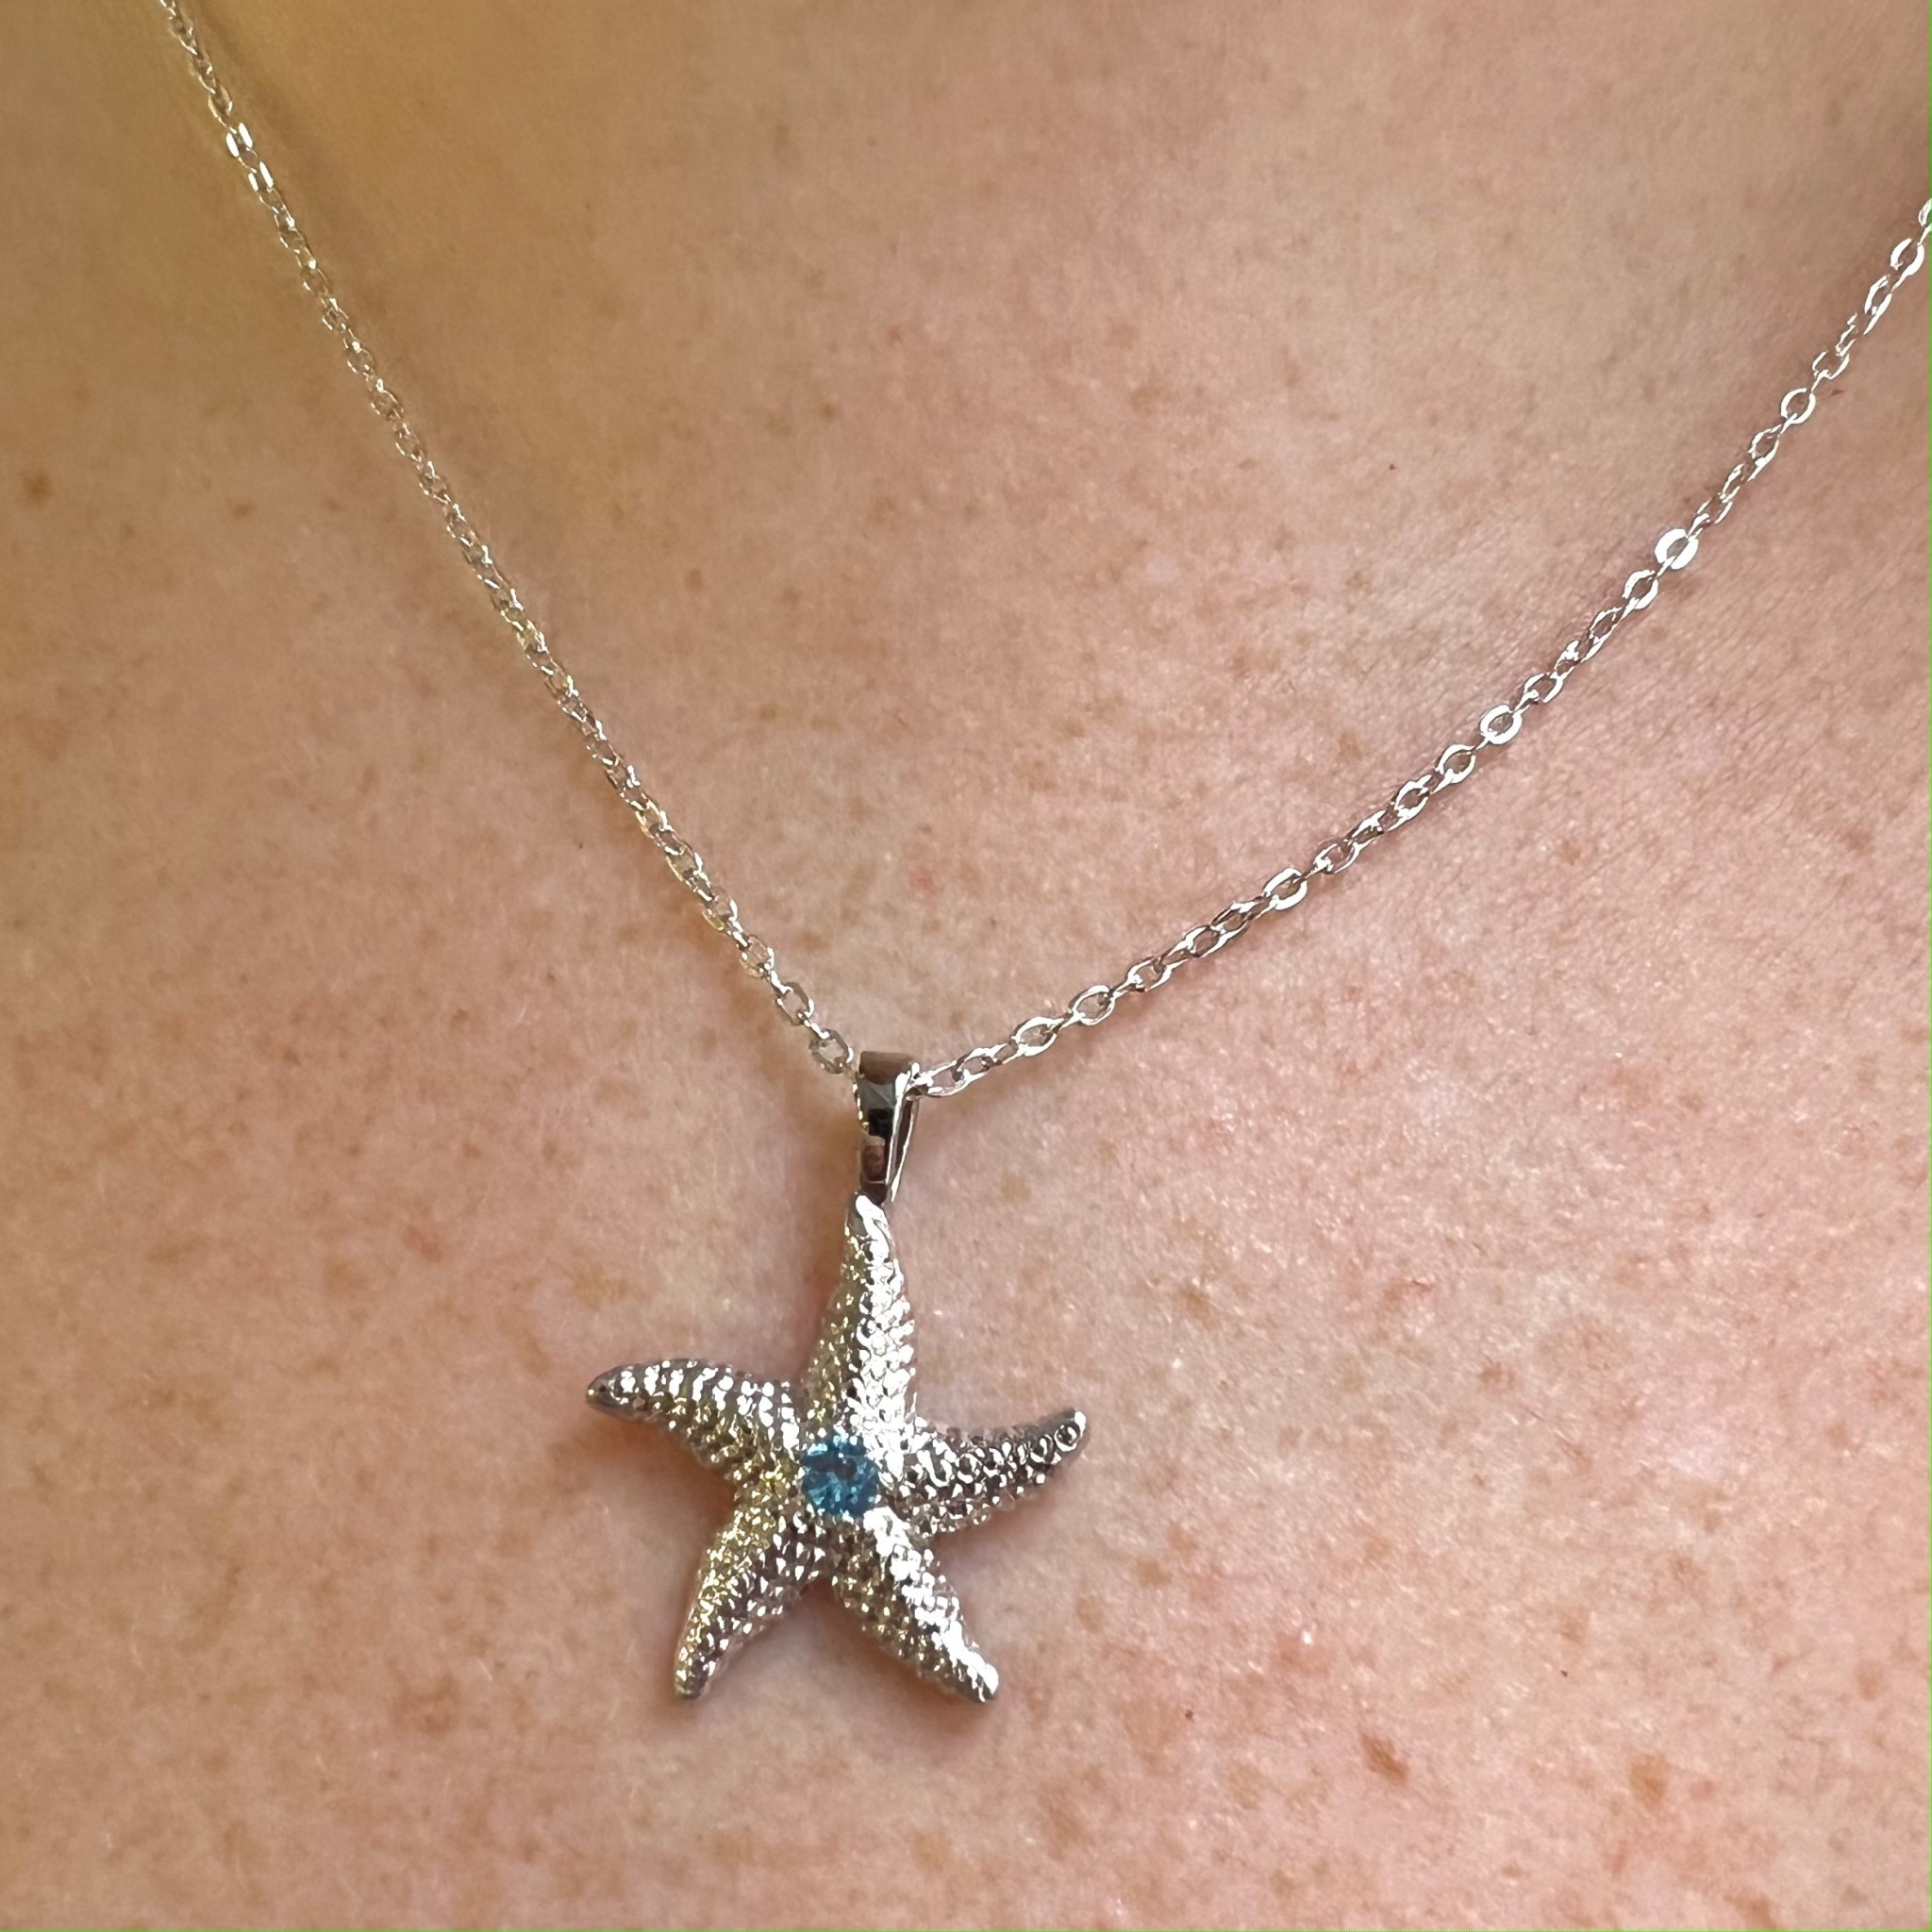 Premium Photo | The starfish necklace that is silver